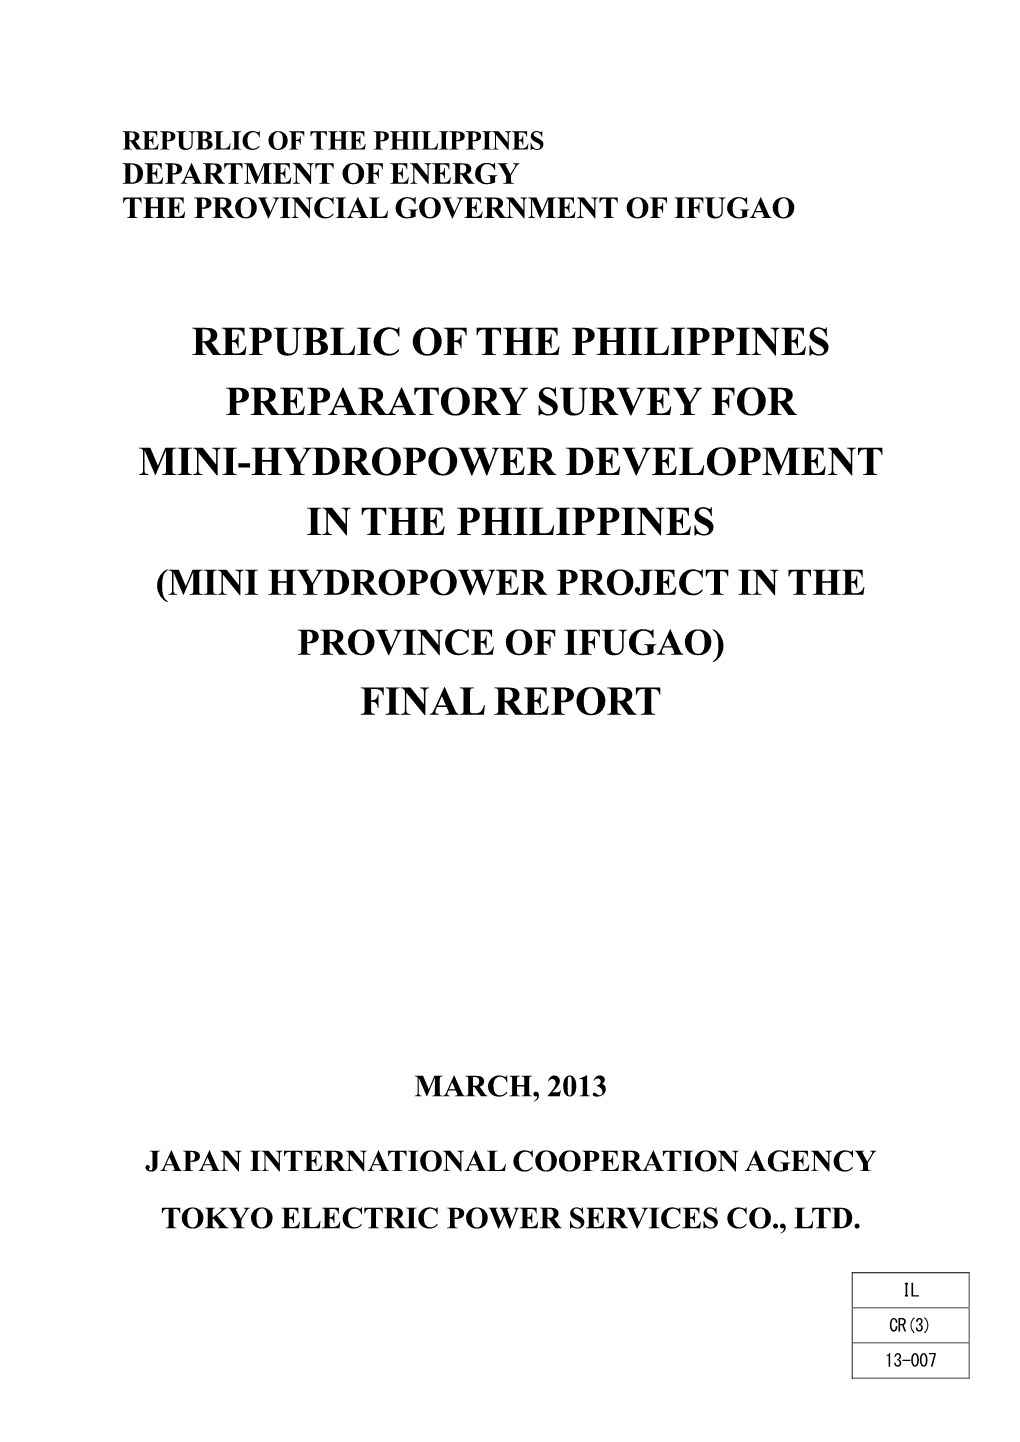 Republic of the Philippines Preparatory Survey for Mini-Hydropower Development in the Philippines (Mini Hydropower Project in the Province of Ifugao) Final Report